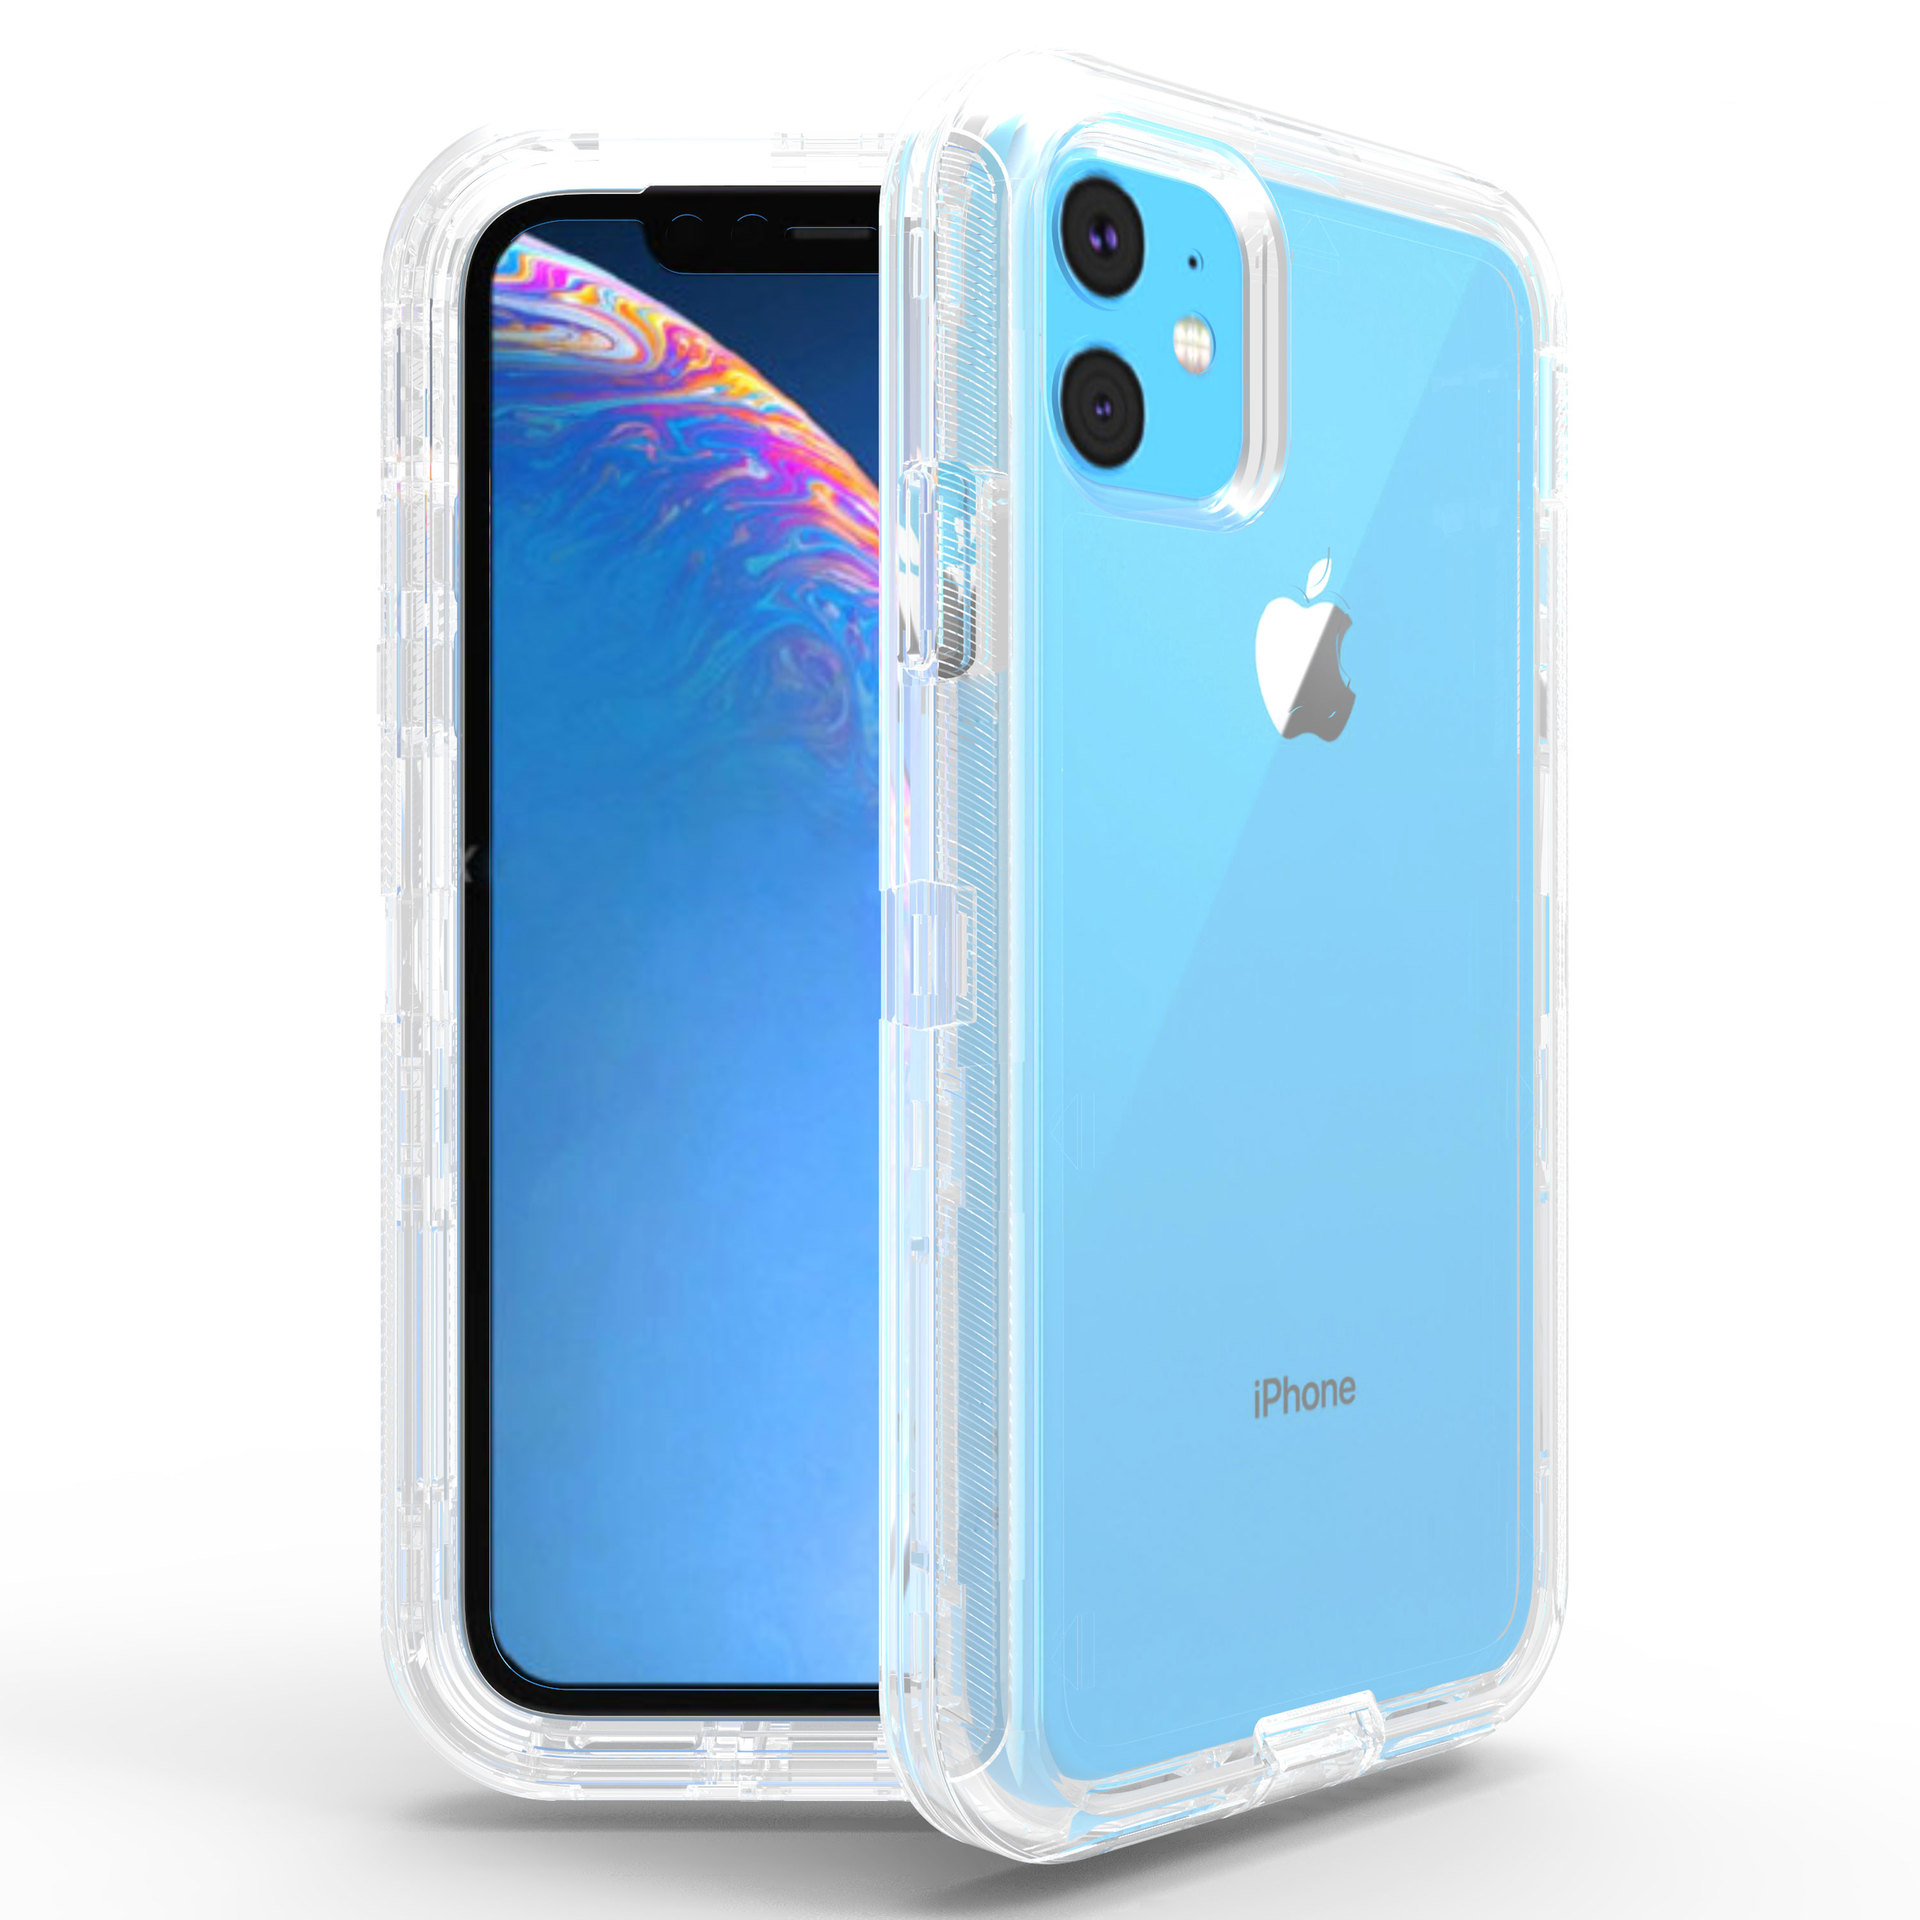 Transparent Armor Robot Case for iPHONE 12 / 12 Pro 6.1 (Clear)